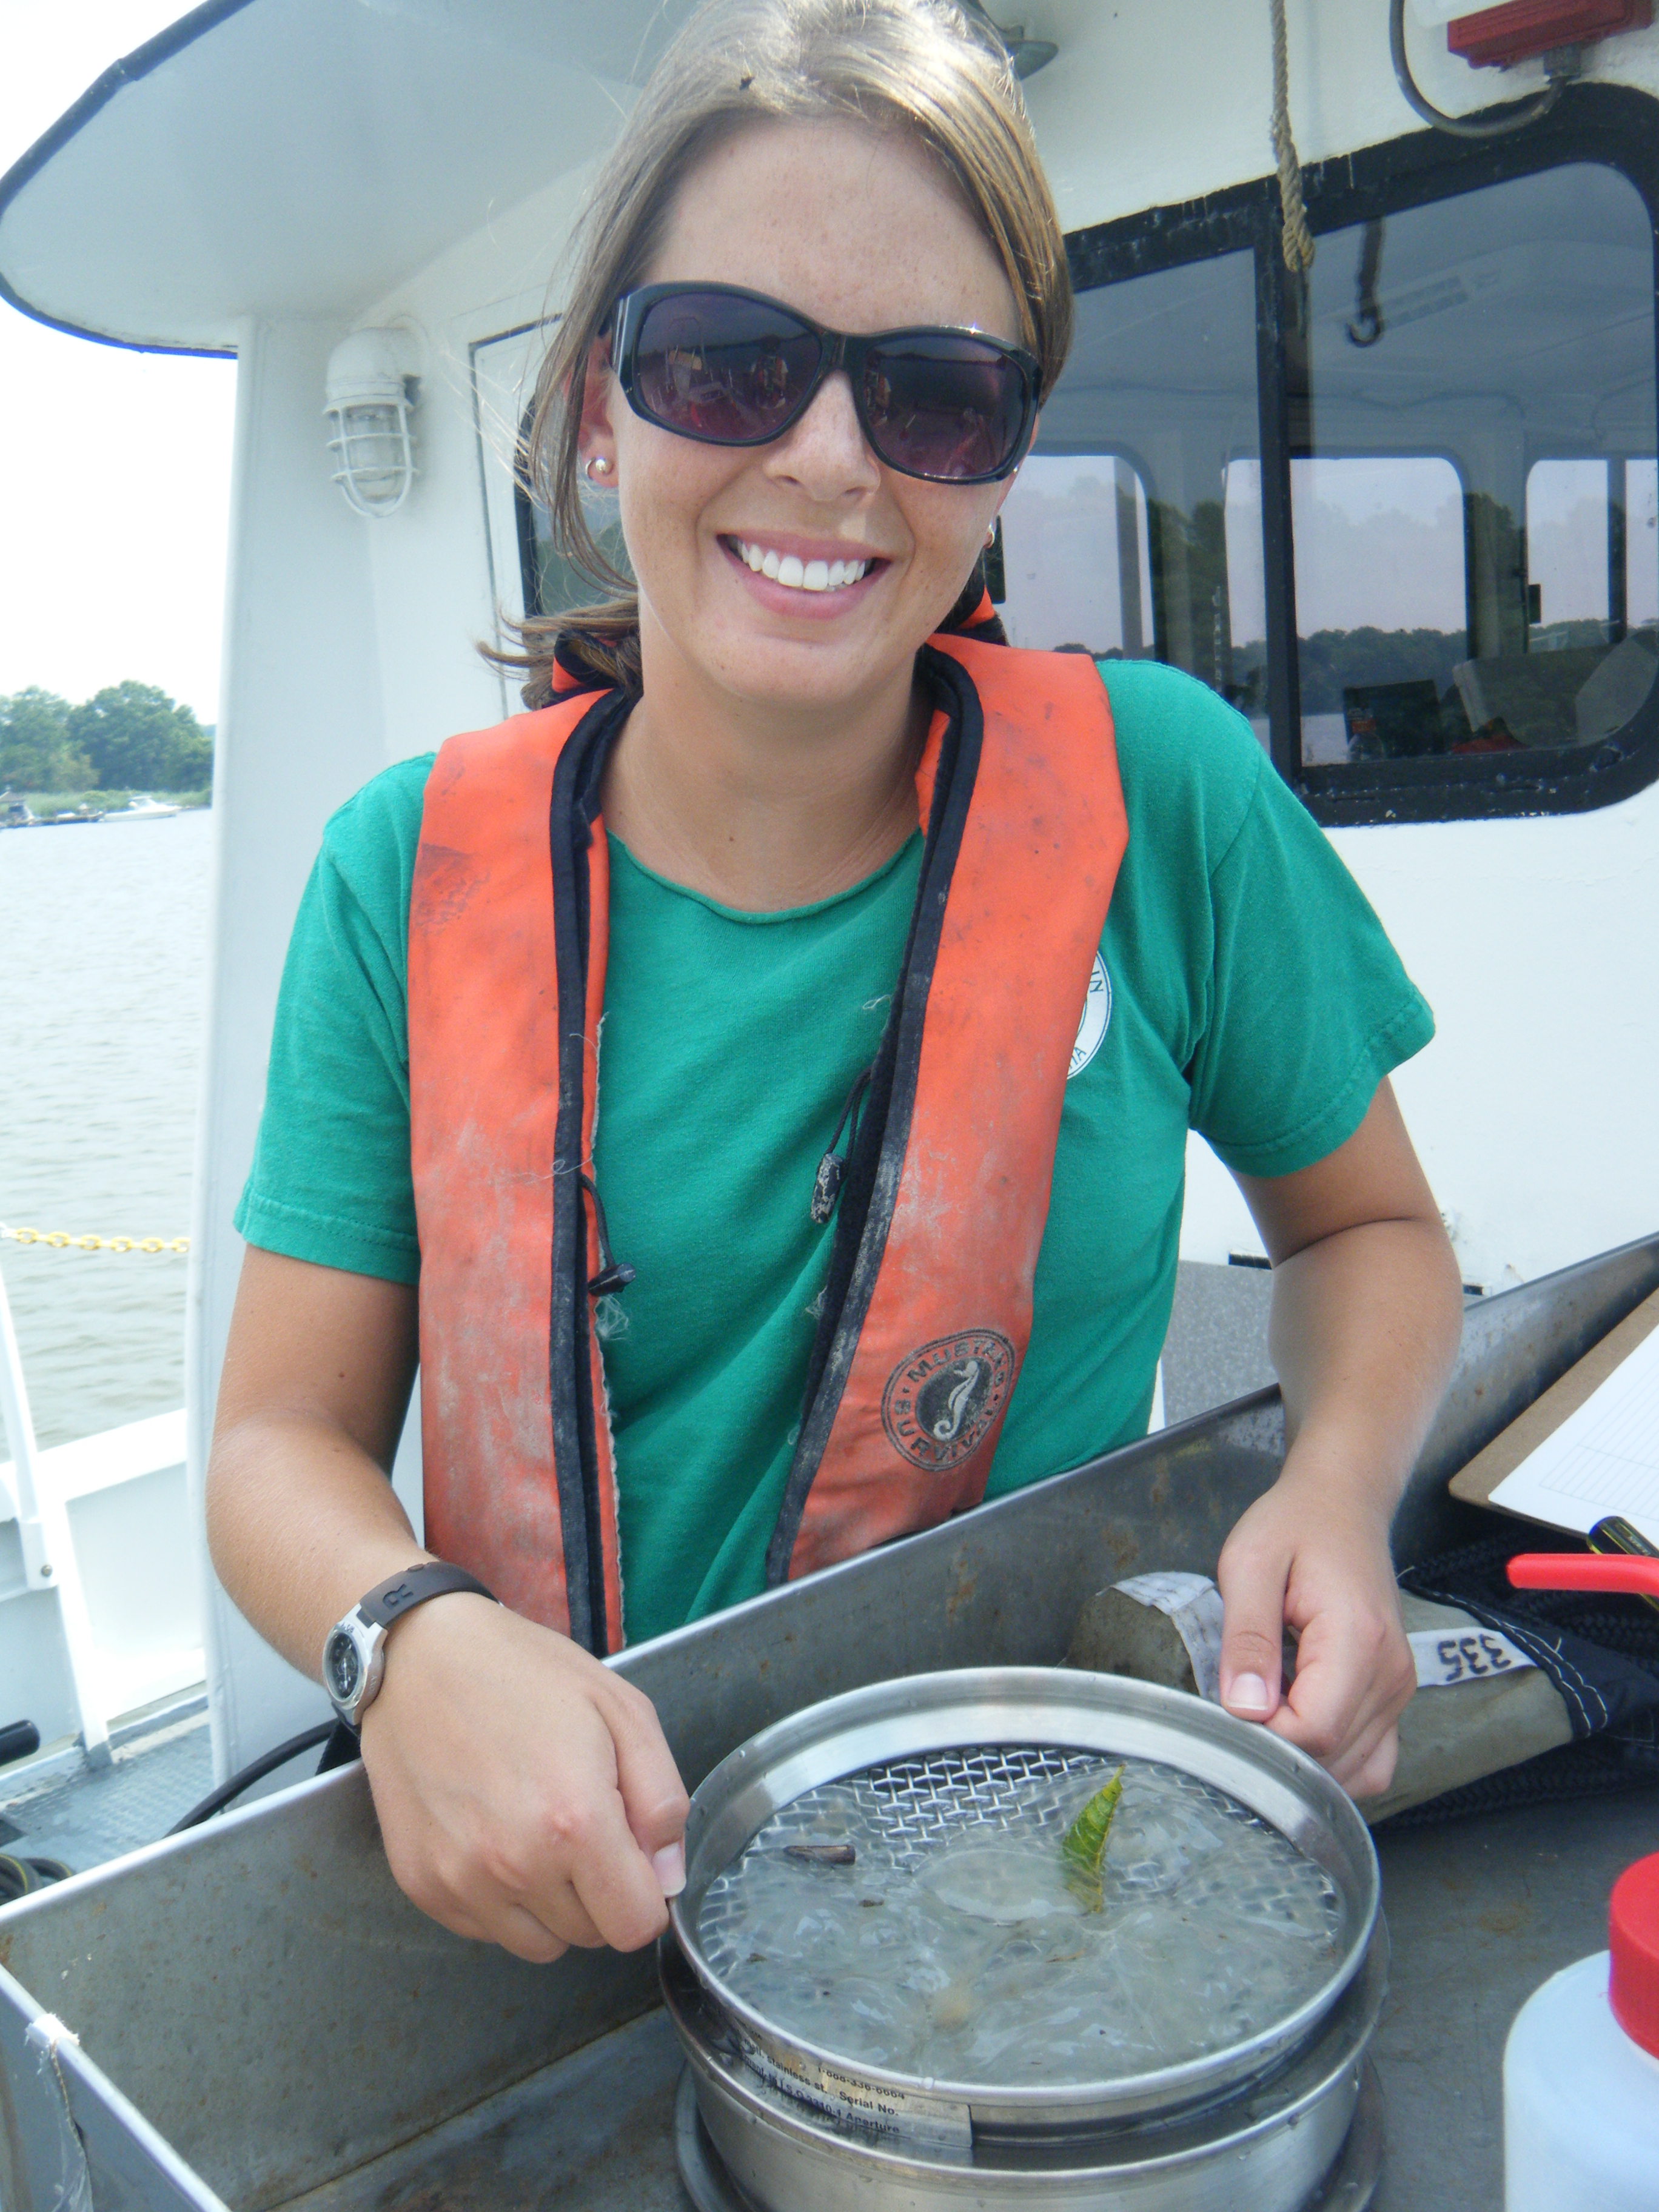 Lippiatt collects microplastic samples during her Sea Grant fellowship in 2010.